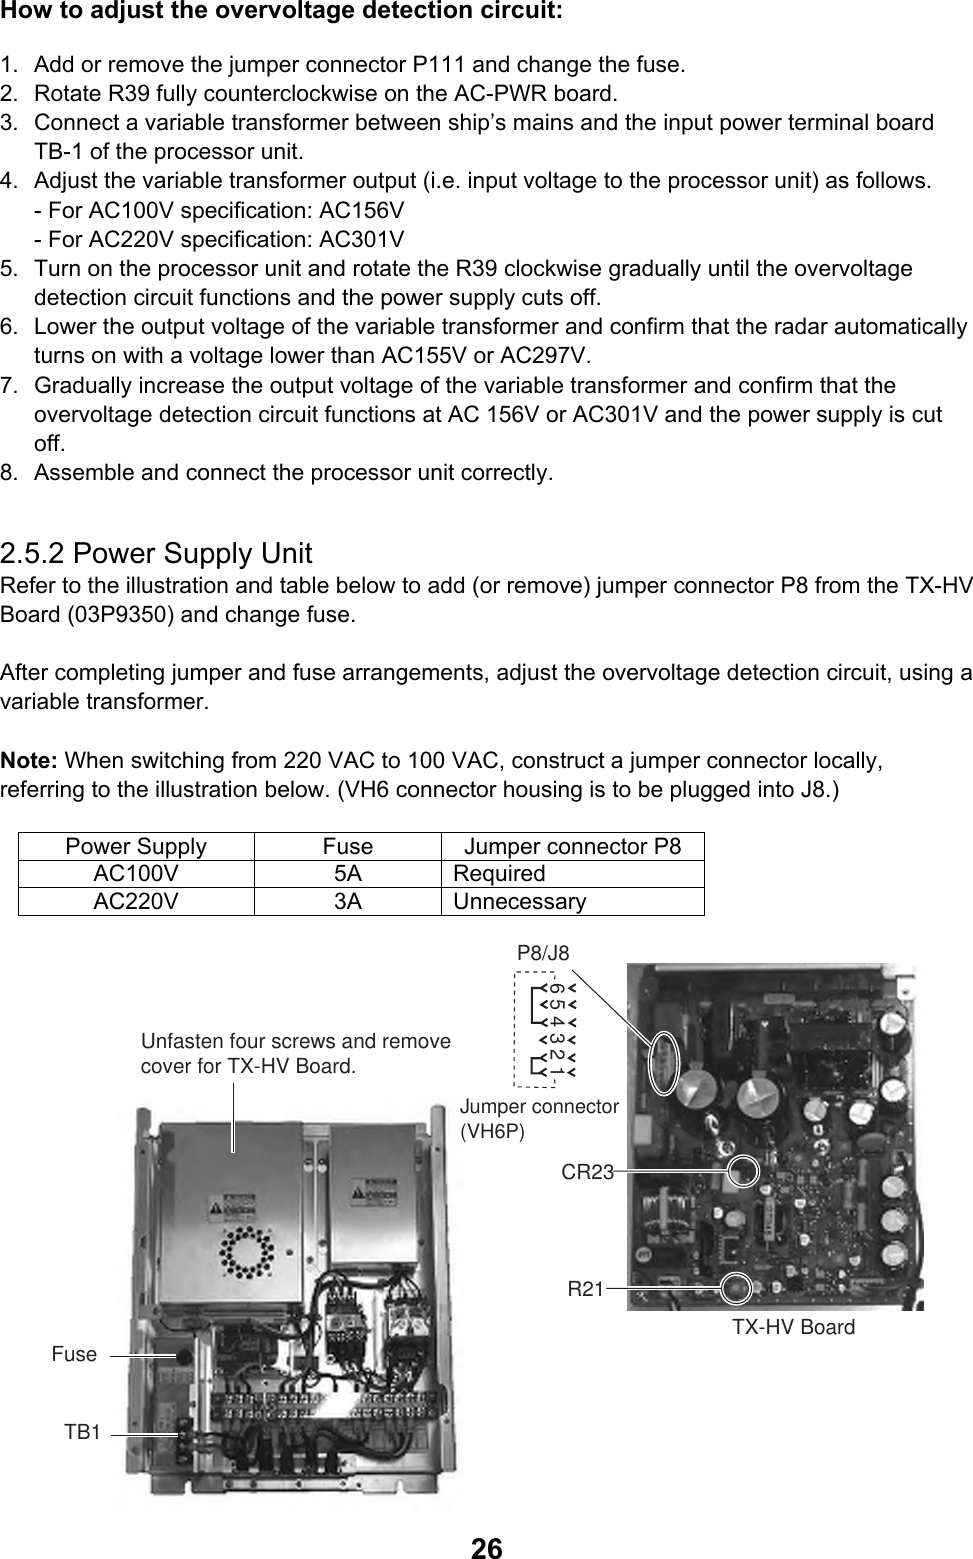  26How to adjust the overvoltage detection circuit: 1.  Add or remove the jumper connector P111 and change the fuse. 2.  Rotate R39 fully counterclockwise on the AC-PWR board. 3.  Connect a variable transformer between ship’s mains and the input power terminal board TB-1 of the processor unit. 4.  Adjust the variable transformer output (i.e. input voltage to the processor unit) as follows. - For AC100V specification: AC156V - For AC220V specification: AC301V 5.  Turn on the processor unit and rotate the R39 clockwise gradually until the overvoltage detection circuit functions and the power supply cuts off. 6.  Lower the output voltage of the variable transformer and confirm that the radar automatically turns on with a voltage lower than AC155V or AC297V. 7.  Gradually increase the output voltage of the variable transformer and confirm that the overvoltage detection circuit functions at AC 156V or AC301V and the power supply is cut off. 8.  Assemble and connect the processor unit correctly.  2.5.2 Power Supply Unit Refer to the illustration and table below to add (or remove) jumper connector P8 from the TX-HV Board (03P9350) and change fuse.  After completing jumper and fuse arrangements, adjust the overvoltage detection circuit, using a variable transformer.  Note: When switching from 220 VAC to 100 VAC, construct a jumper connector locally, referring to the illustration below. (VH6 connector housing is to be plugged into J8.)  Power Supply  Fuse  Jumper connector P8 AC100V 5A Required AC220V 3A Unnecessary FuseTX-HV BoardUnfasten four screws and removecover for TX-HV Board.R21CR23P8/J86 5 4 3 2 1Jumper connector(VH6P)TB1 